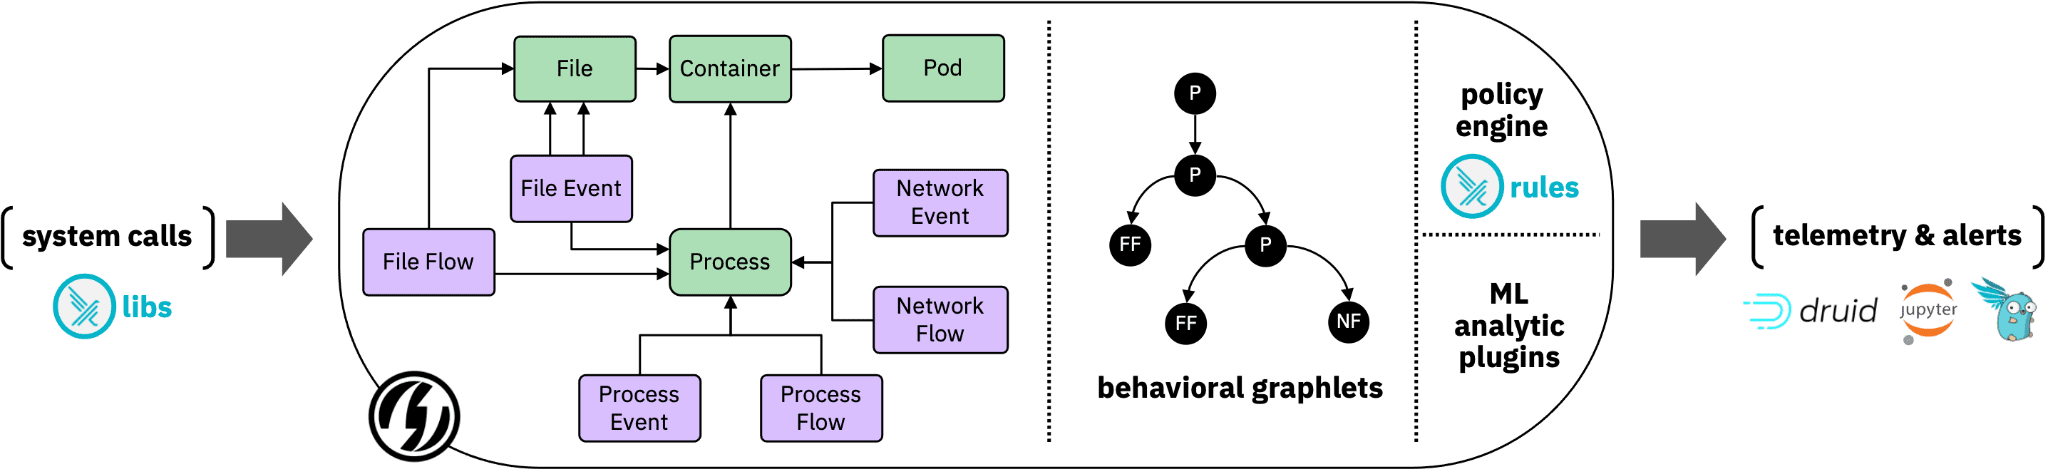 SysFlow architecture